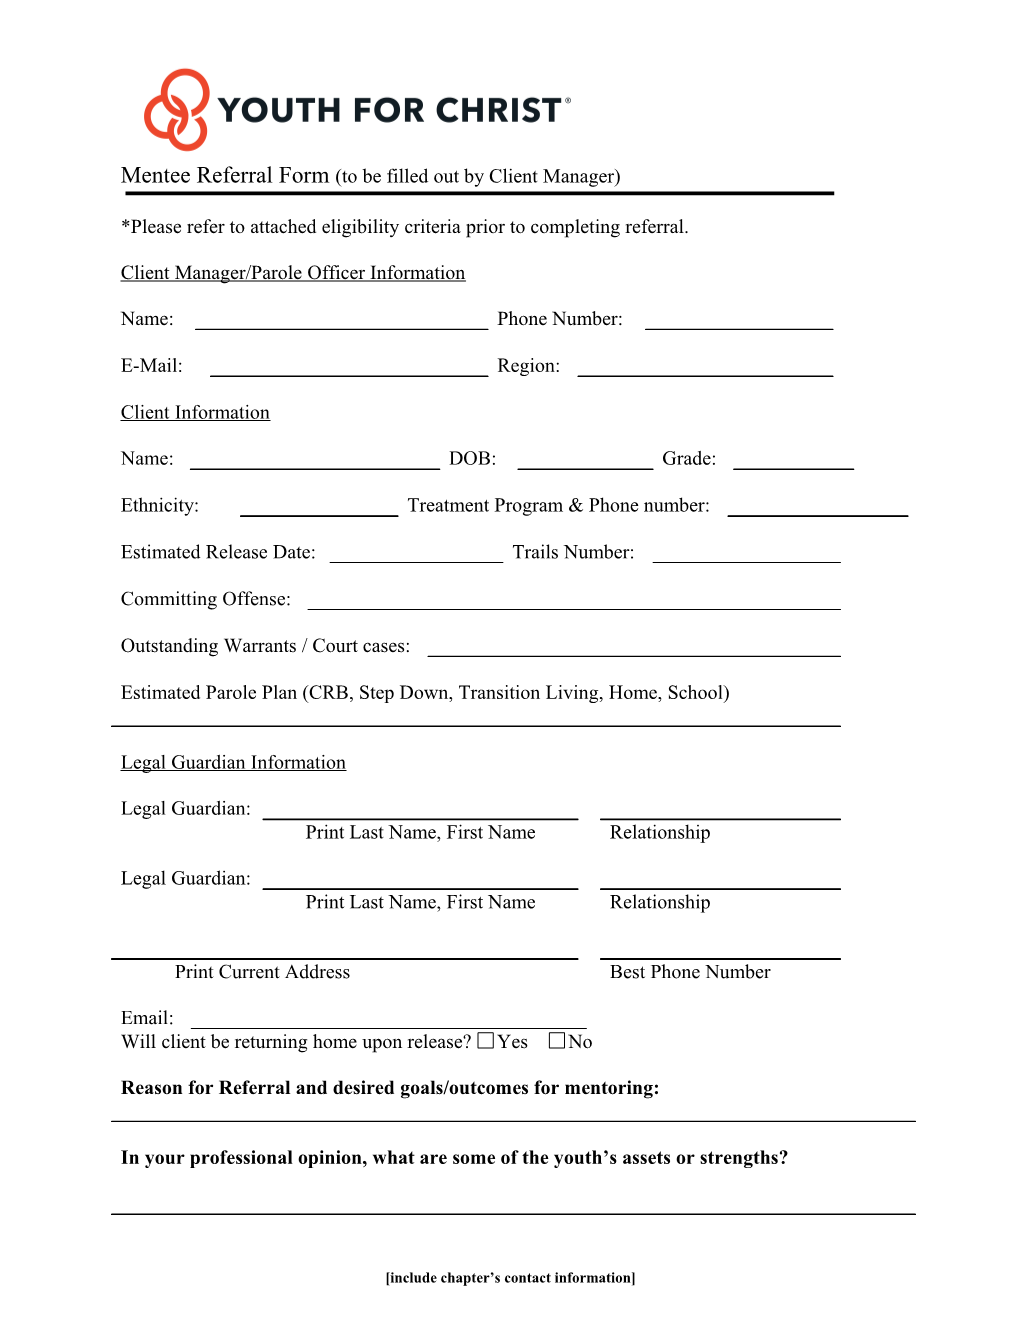 Mentee Referral Form (To Be Filled out by Client Manager)